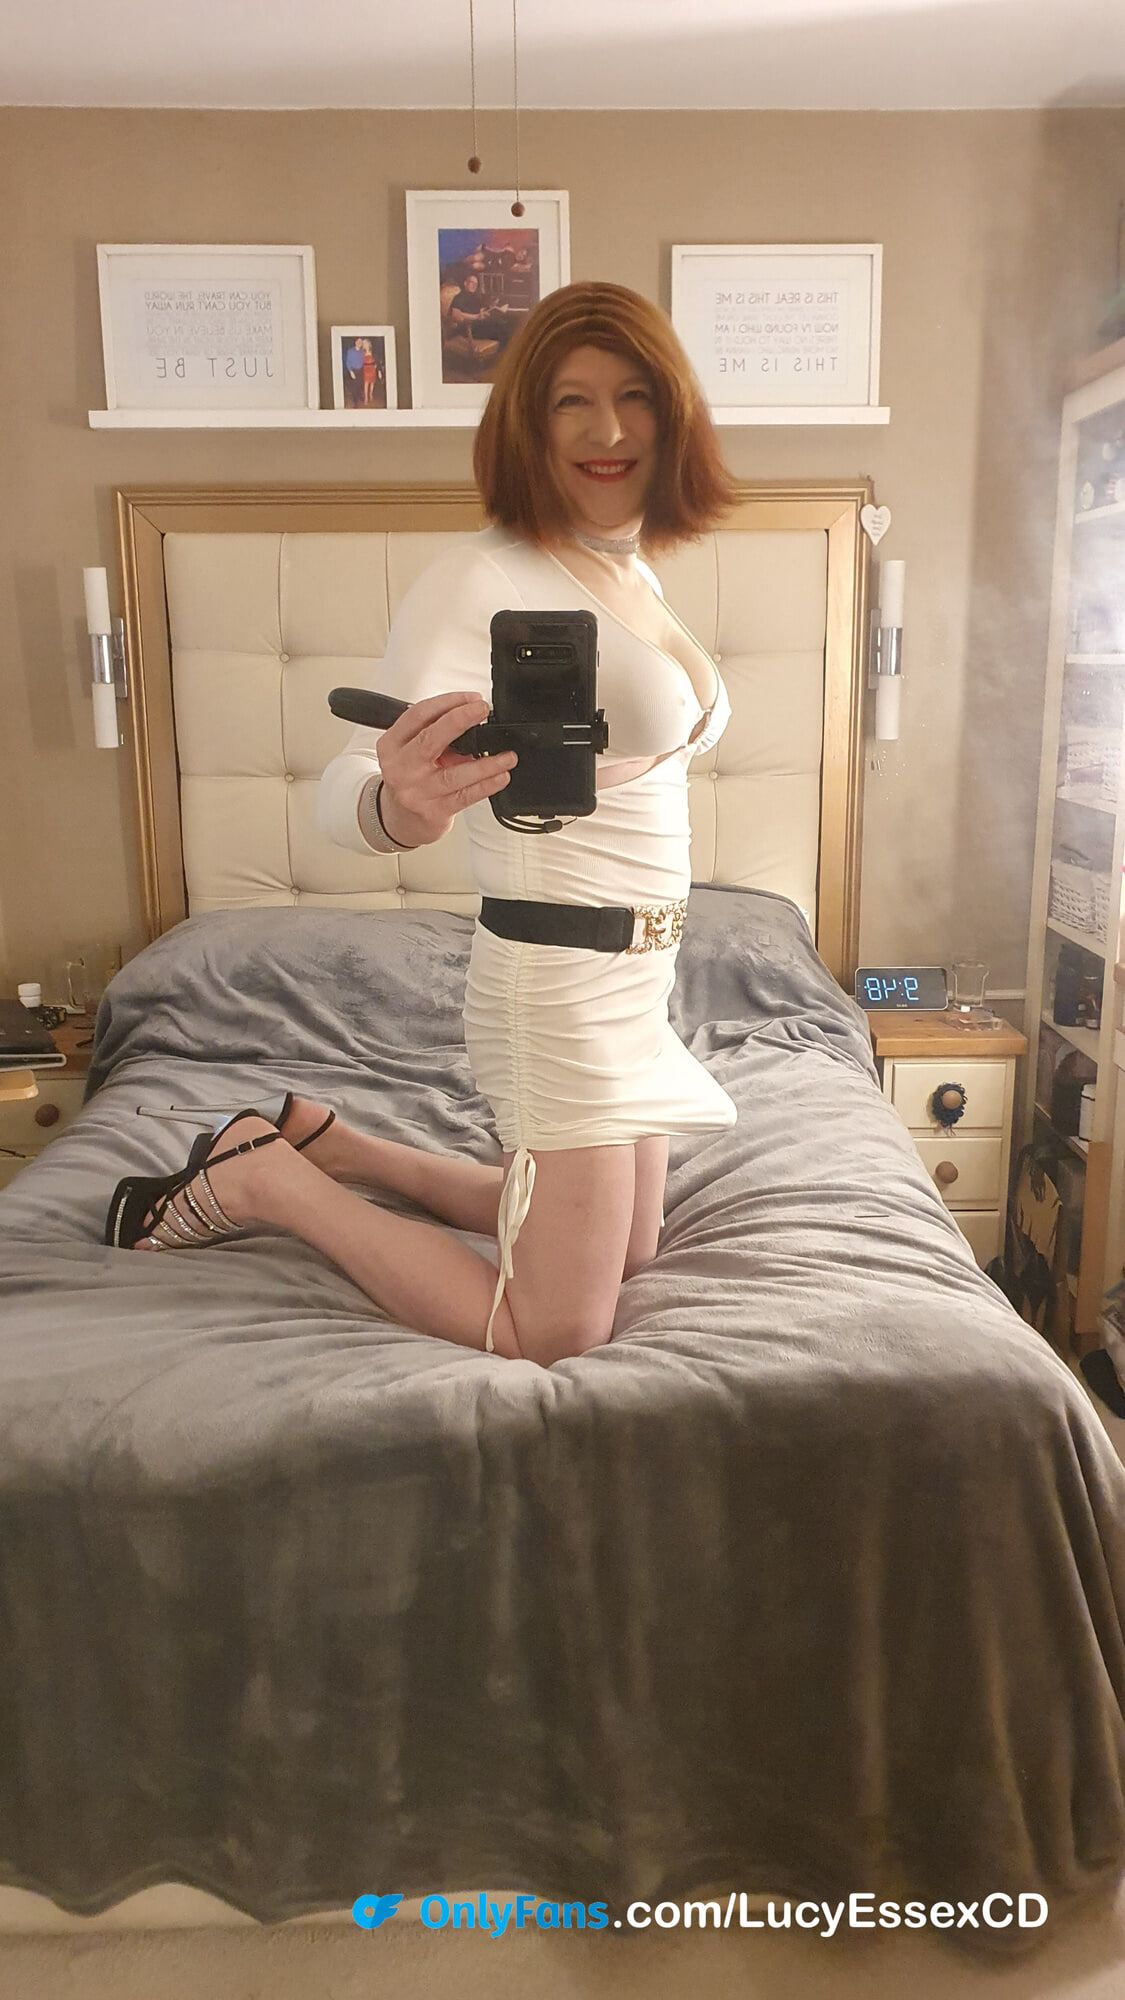 Sexy TGirl Lucy Essex, Wanking my big cock in white dress #7